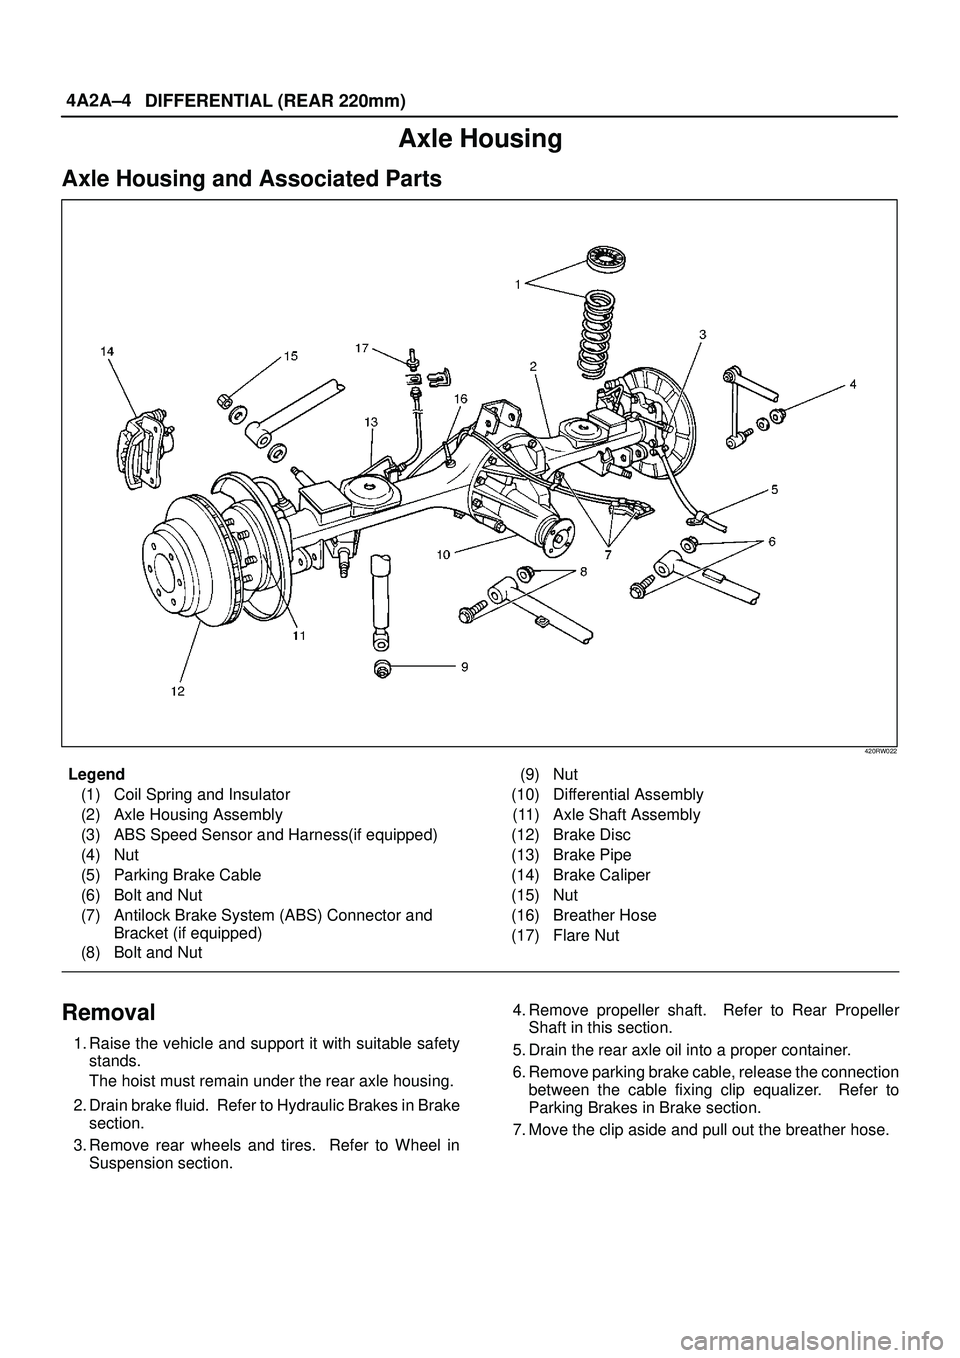 ISUZU TROOPER 1998  Service Owners Manual 4A2A±4
DIFFERENTIAL (REAR 220mm)
Axle Housing
Axle Housing and Associated Parts
420RW022
Legend
(1) Coil Spring and Insulator
(2) Axle Housing Assembly
(3) ABS Speed Sensor and Harness(if equipped)
(